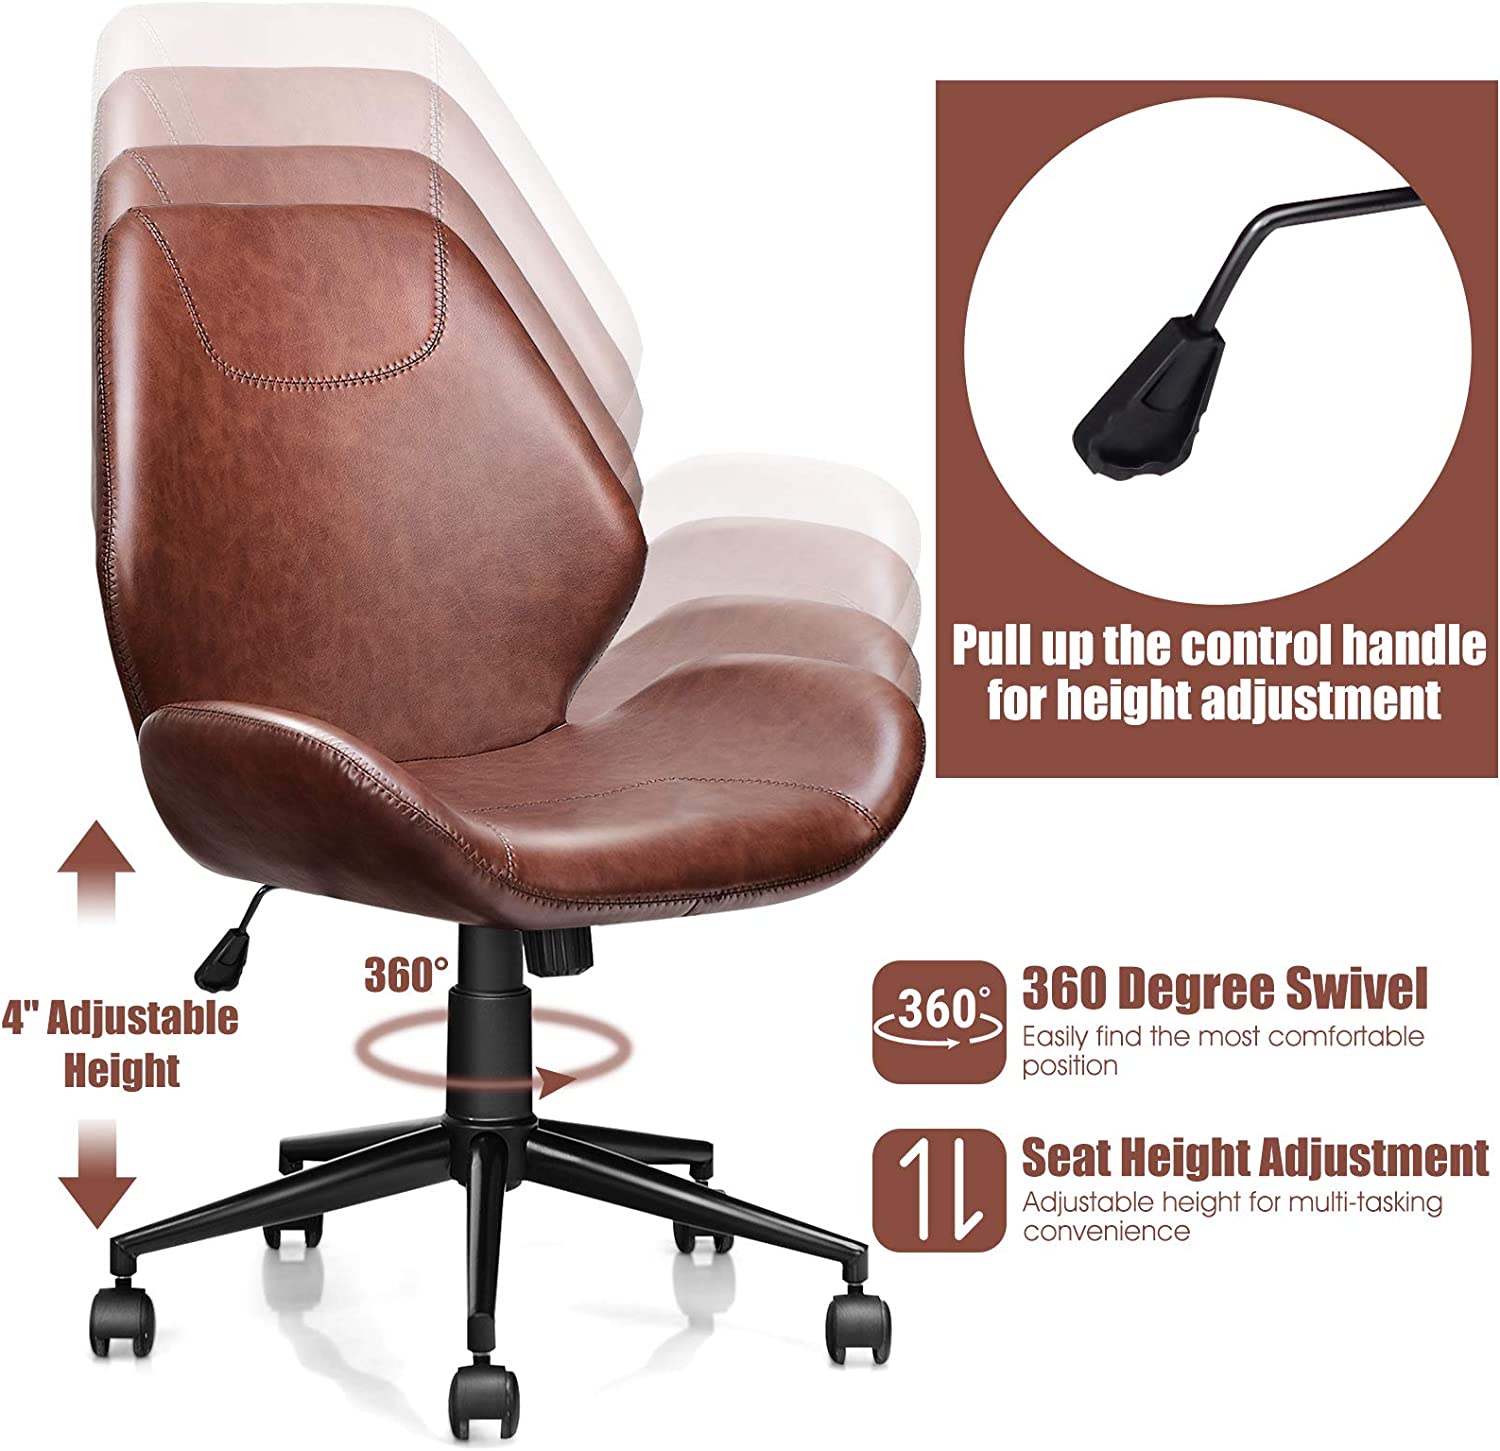 Chairliving  242 LBS PU Leather Office Chair Ergonomic Mid-Back Upholstered Home Leisure Chair with Swivel Casters and Adjustable Seat Height